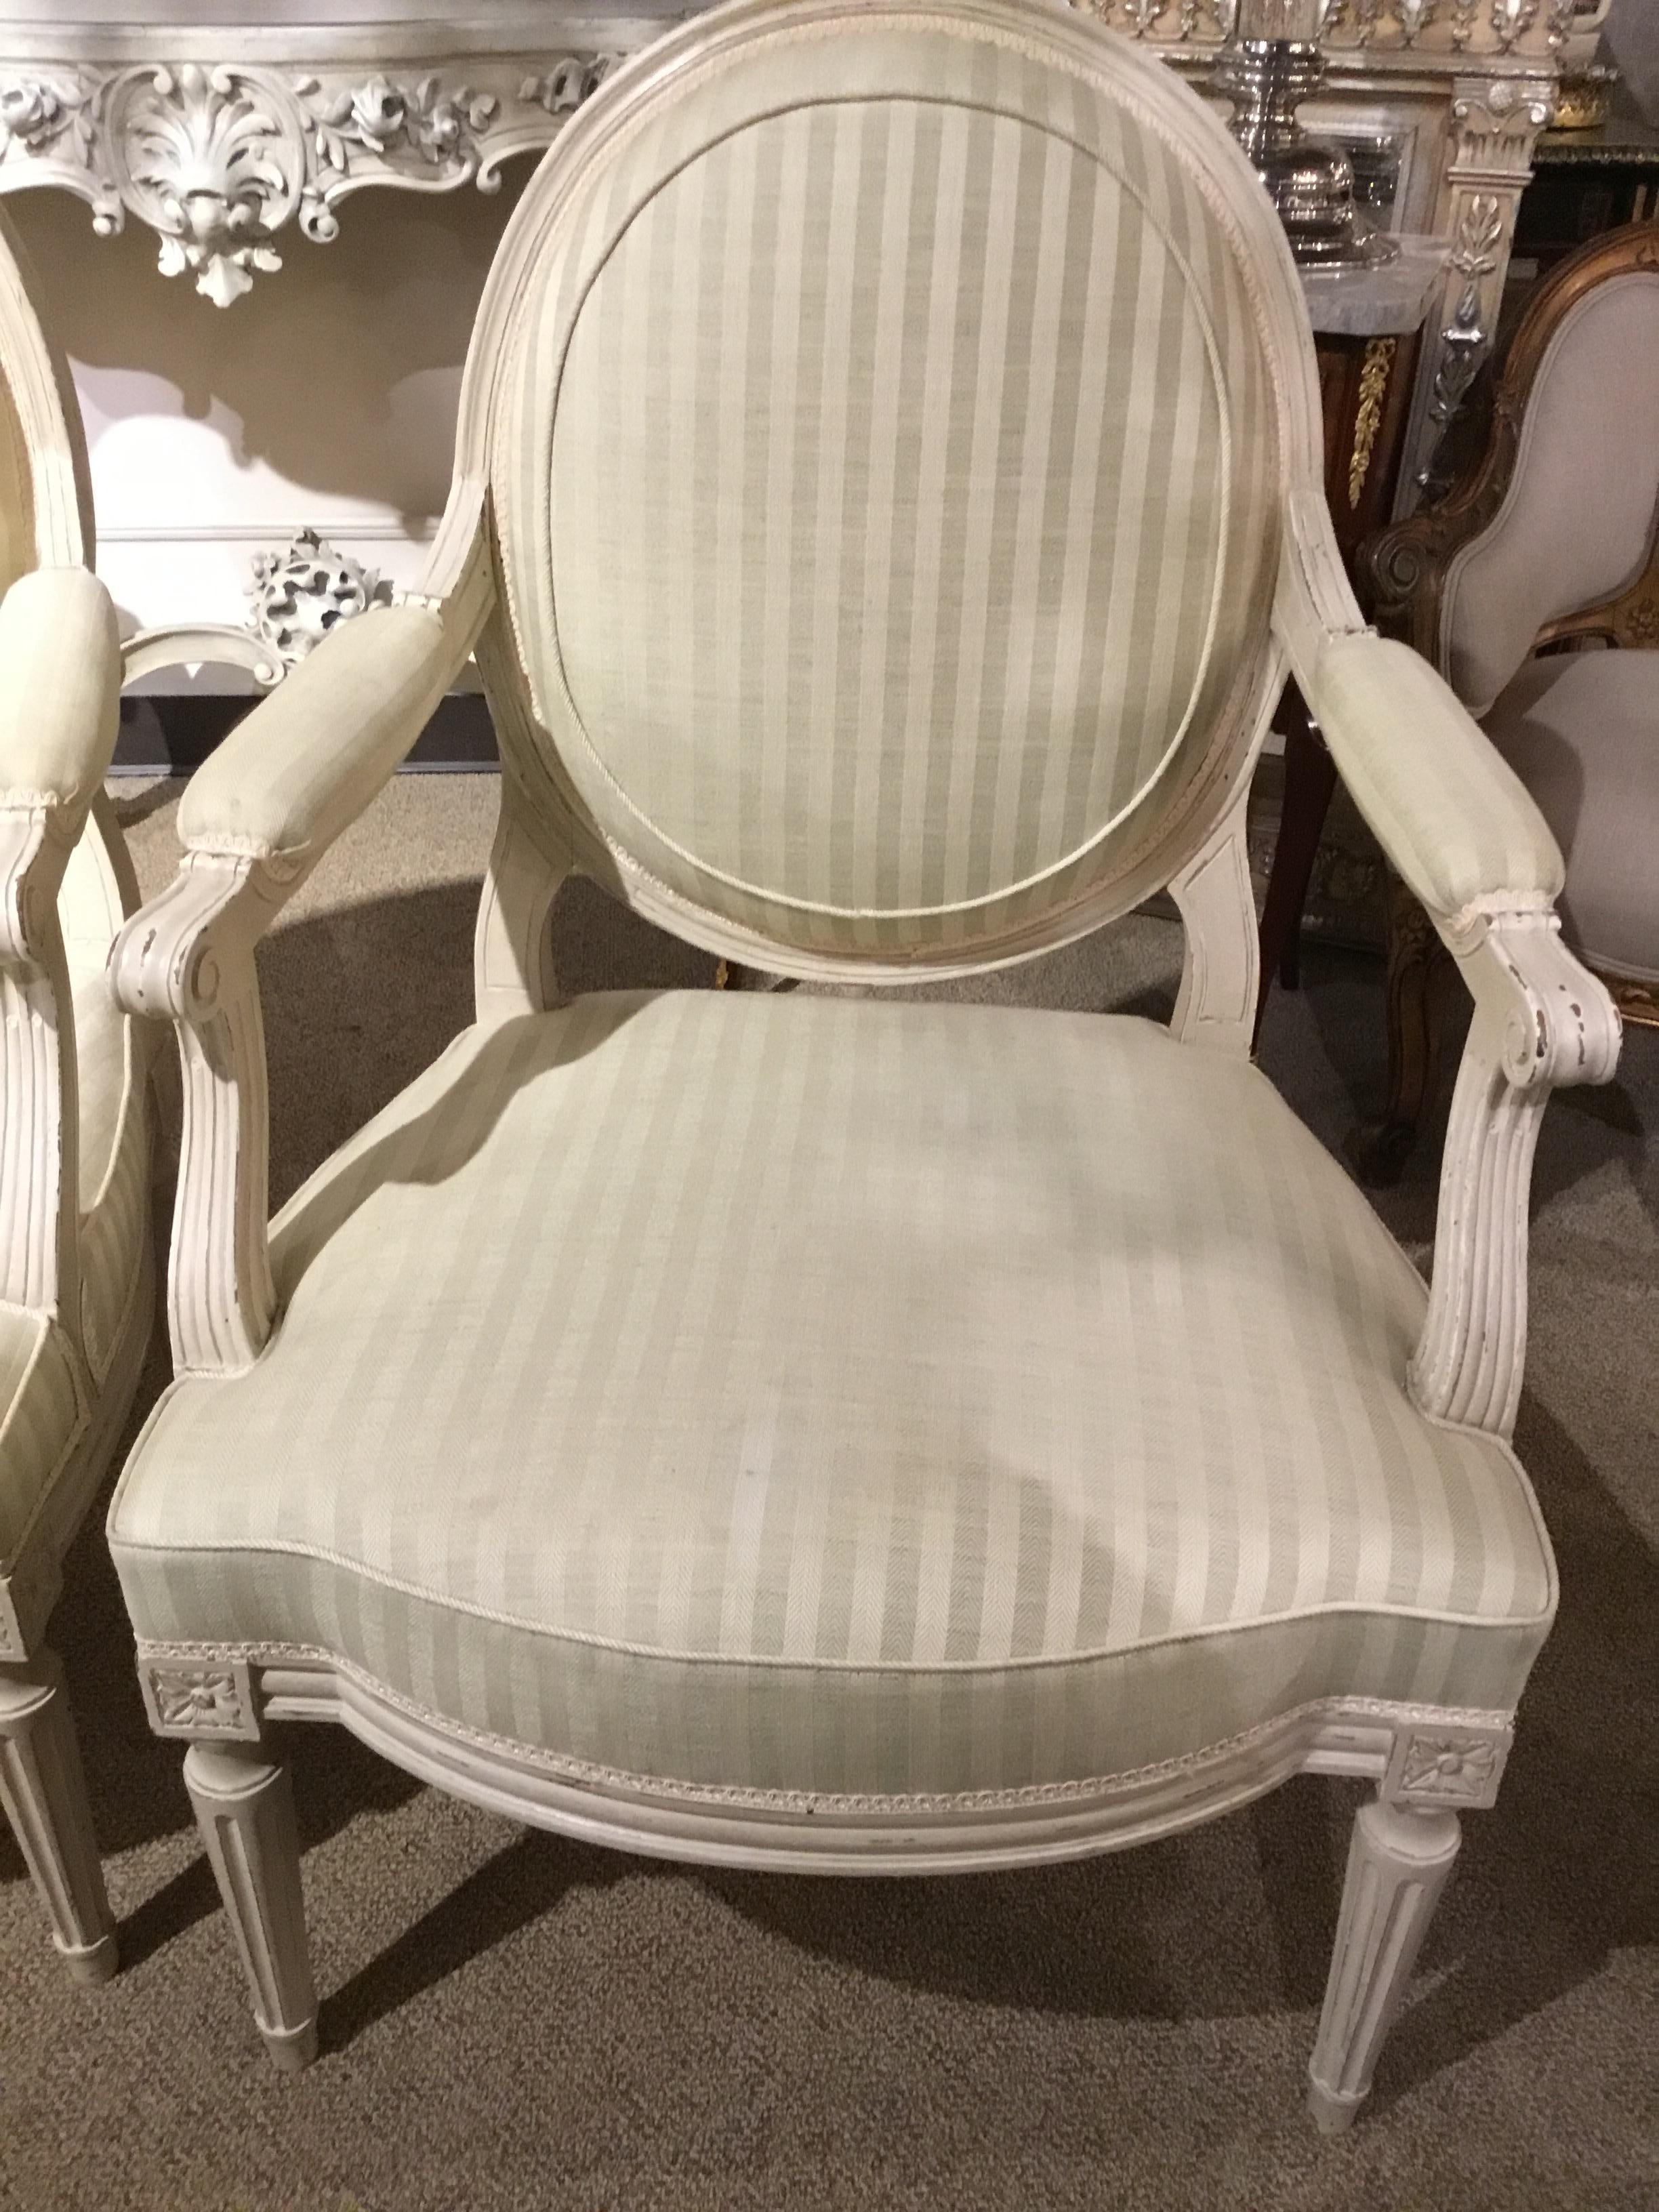 Louis XVI style chairs in white painted finish having an oval shaped back.
White and cream striped fabric. Reeded legs
Painted in a faux artistic distressing finish.